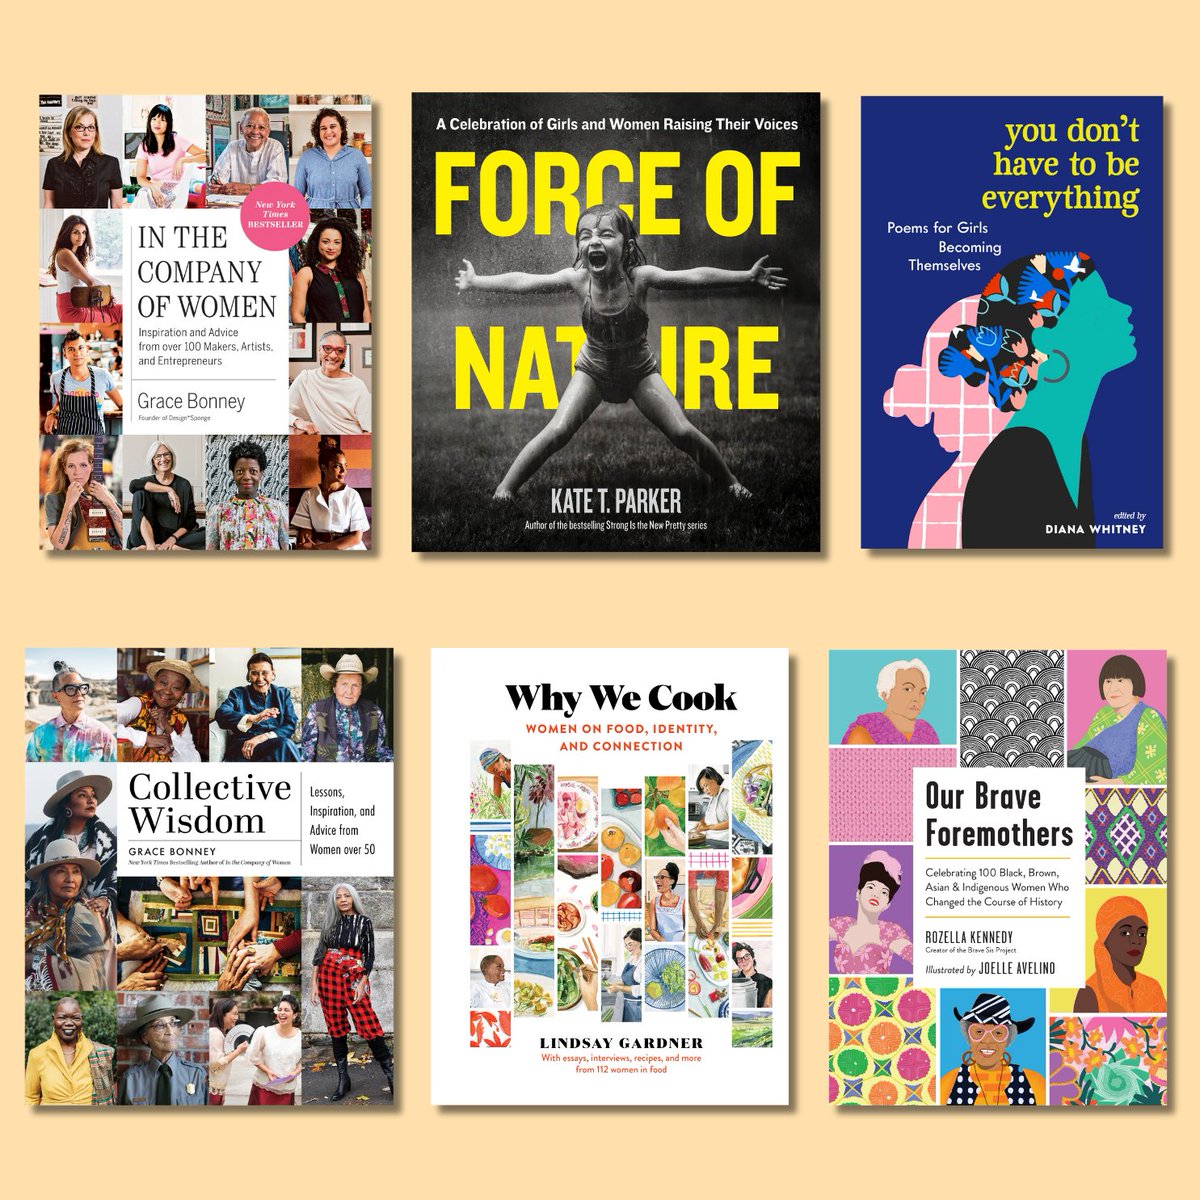 Happy #WomensHistoryMonth! Celebrate the strength, creativity, and inspiration of women past and present, by adding these books to your TBR this month and beyond. Visit bit.ly/3KNxSOF to discover more great reads about, by, and for badass women.